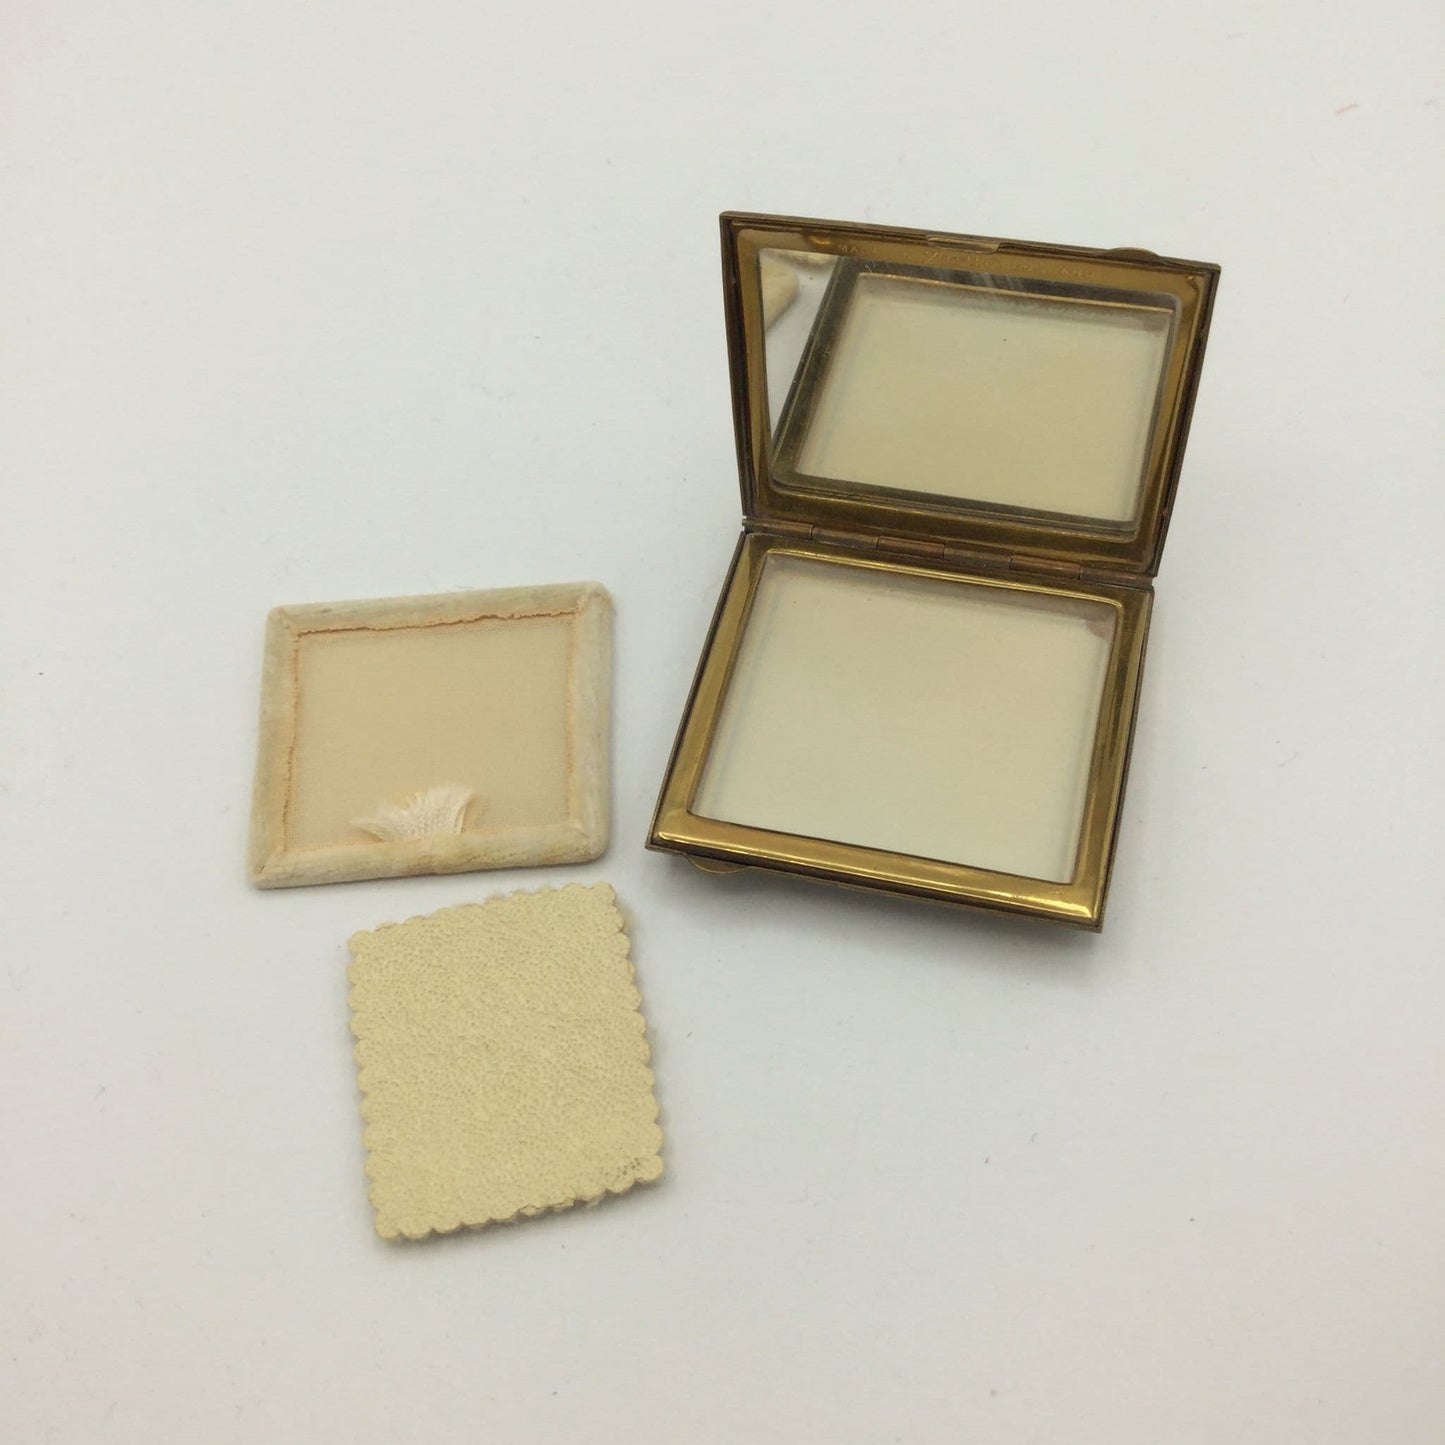 open Zenette powder compact showing a mirror, unsed powder screen and applicator